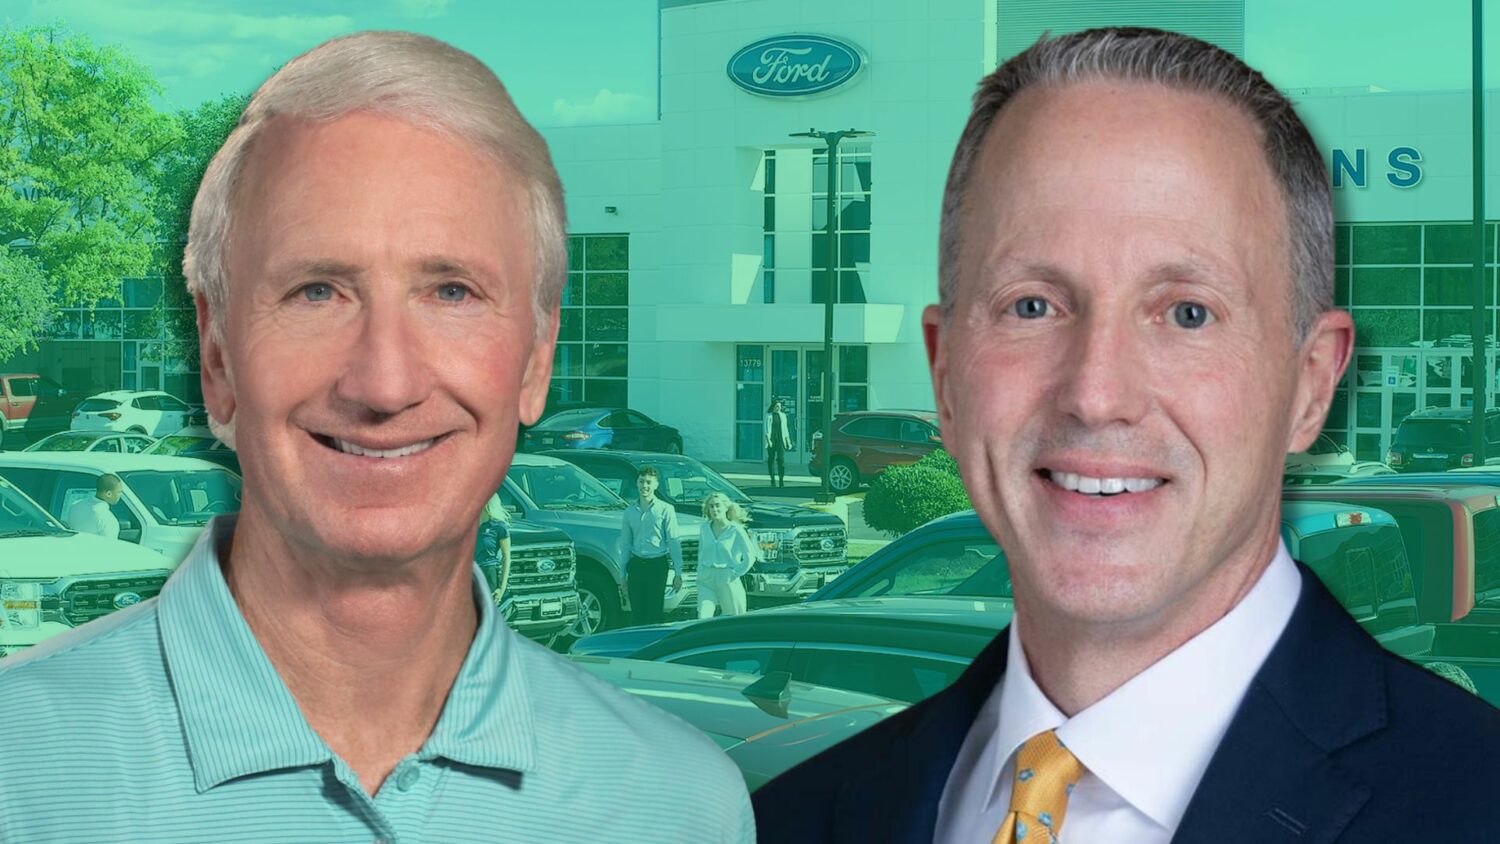 Asbury Automotive Group has agreed to purchase Jim Koons Automotive Companies, marking the first dealership merger of this size since 2021.